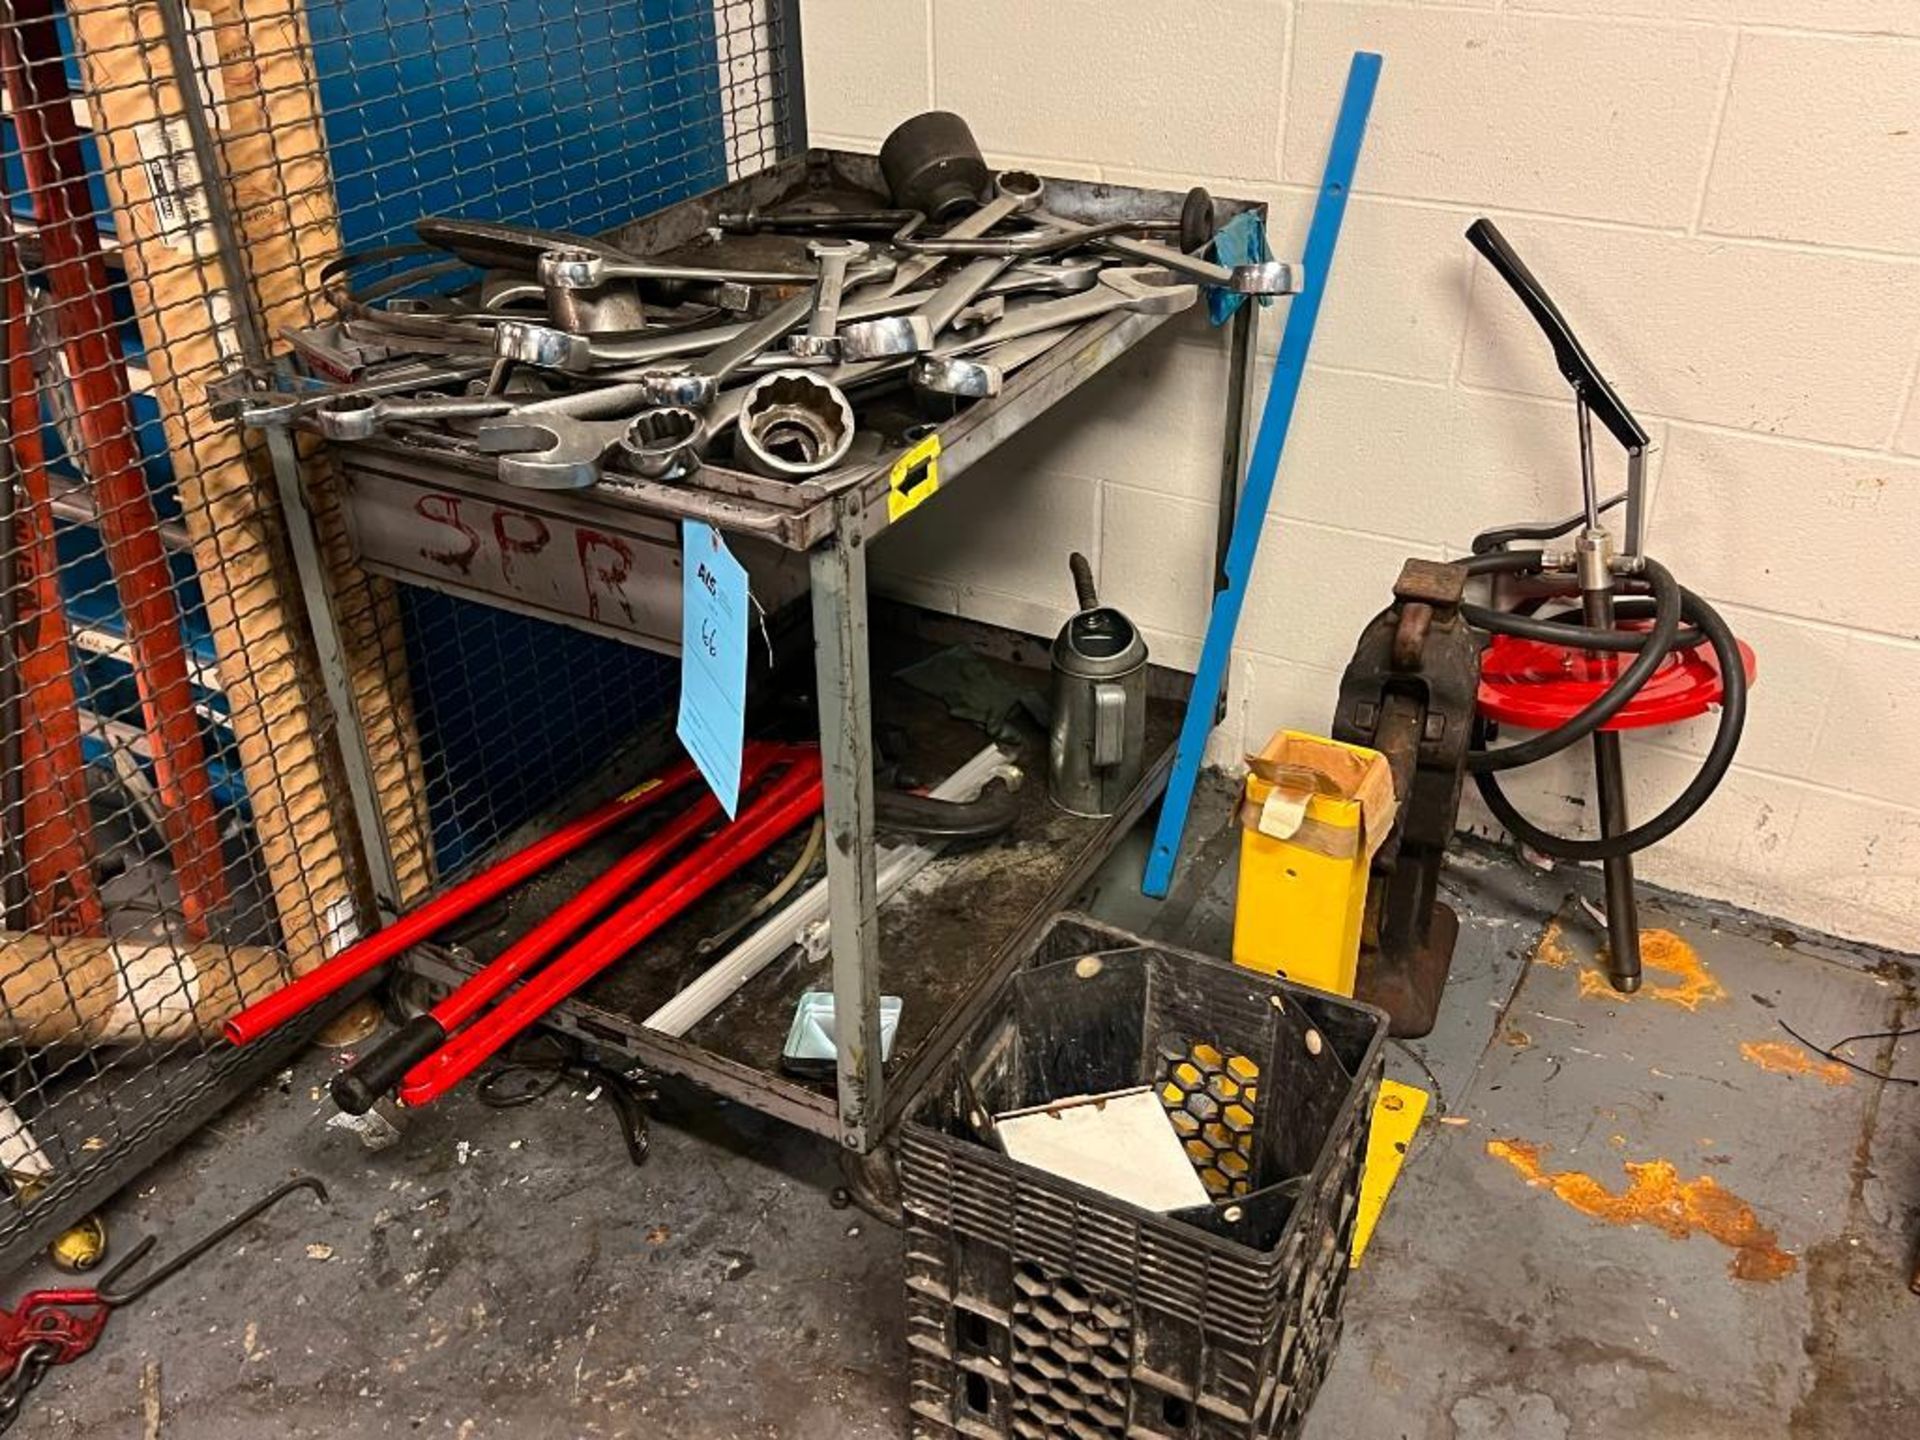 Lot: Metal Cart with Assorted Wrenches, Tools, Bolt Cutters, Manual Pump, and Misc. Contents